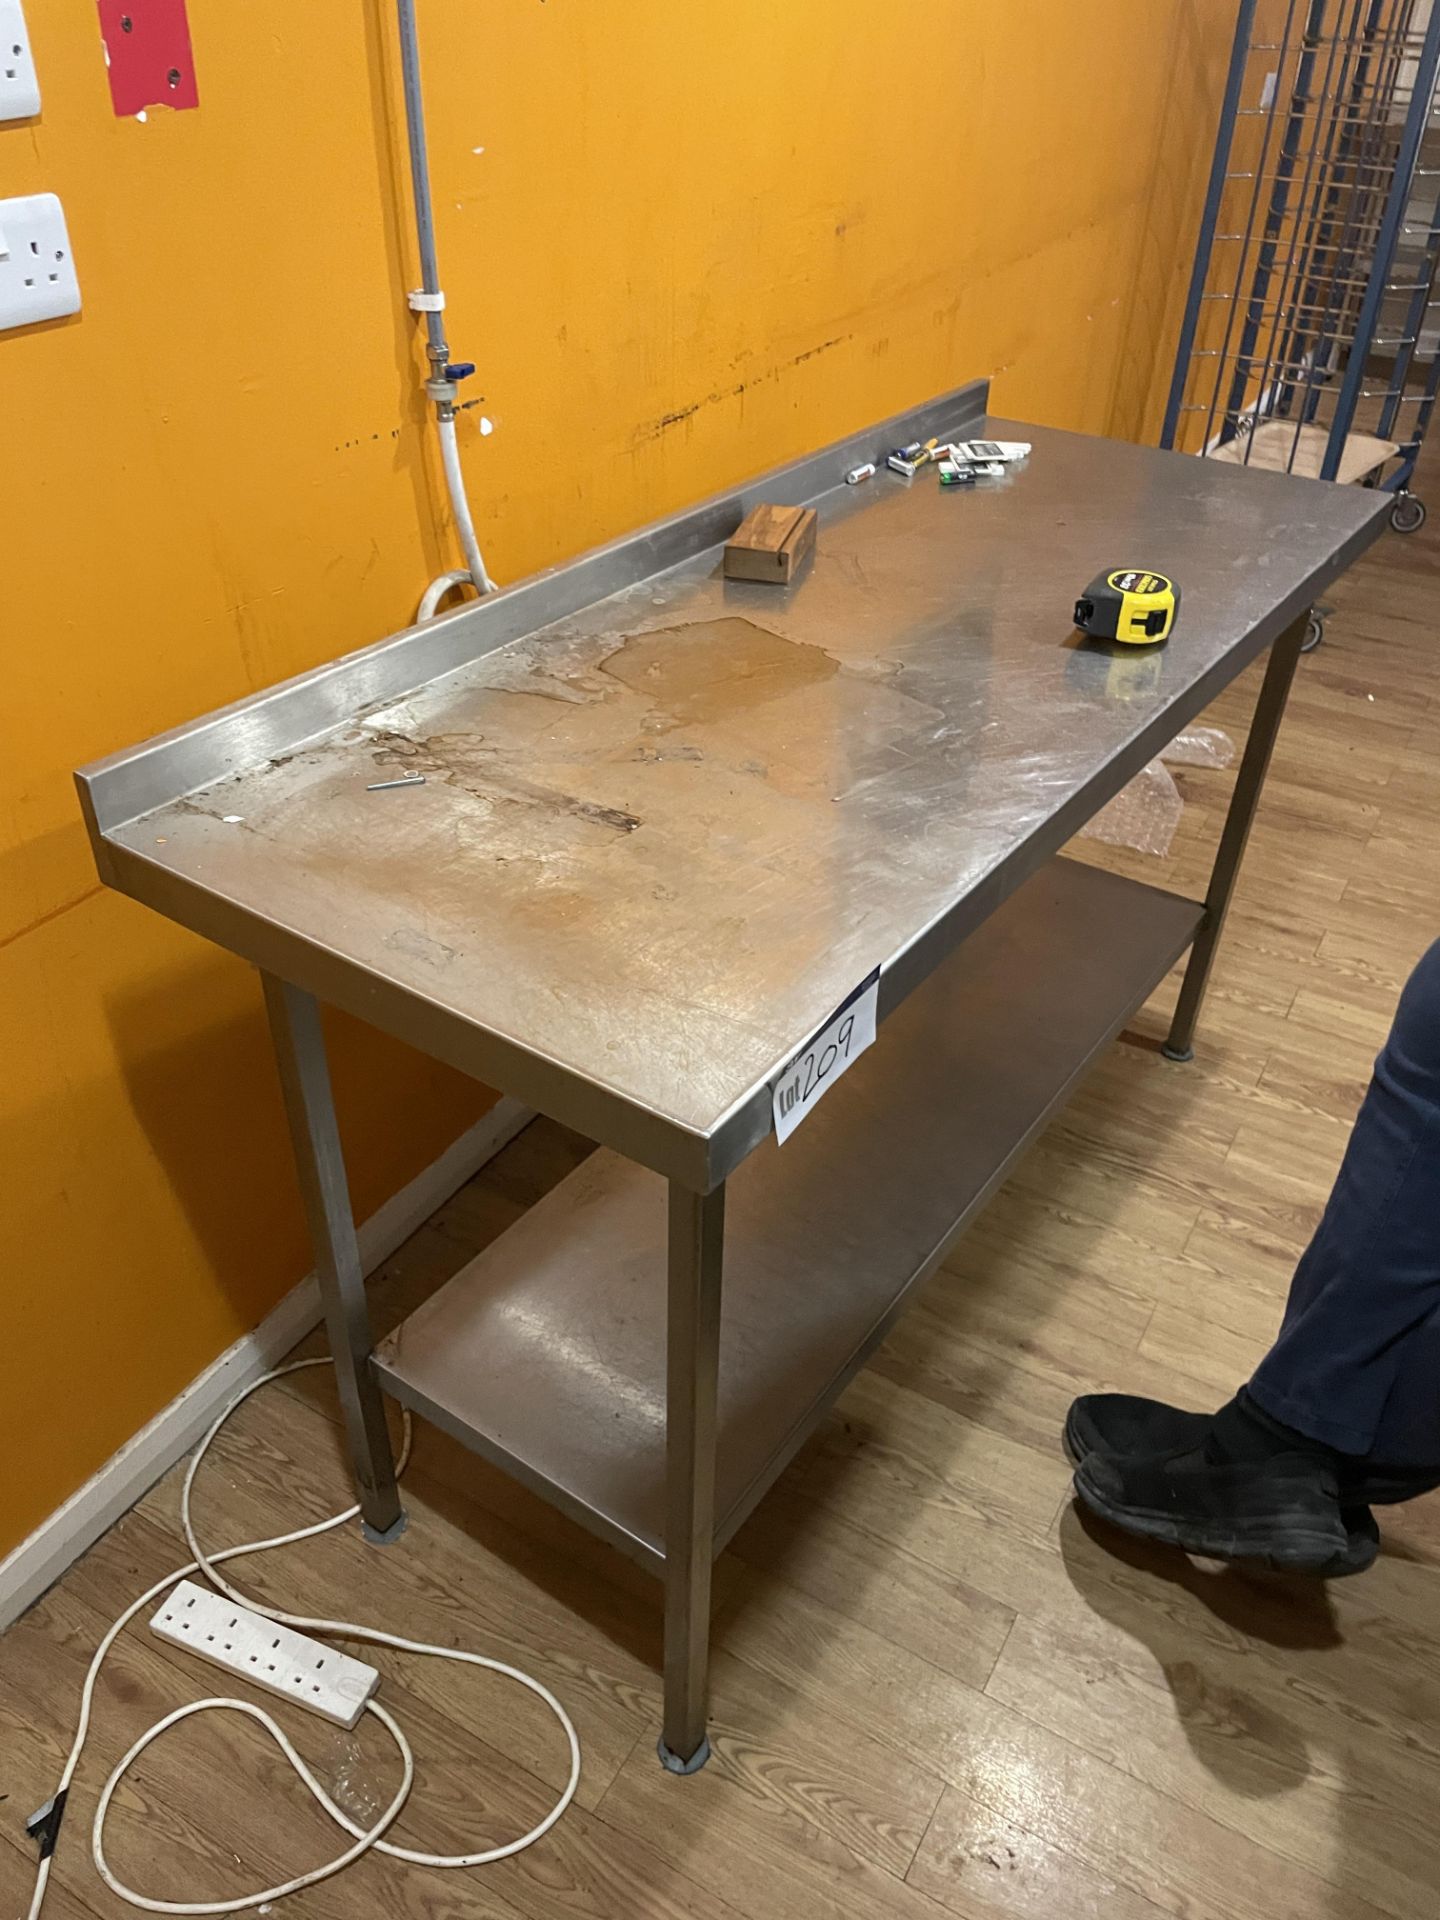 Stainless Steel Bench, approx. 1.5m long Please read the following important notes:- Air